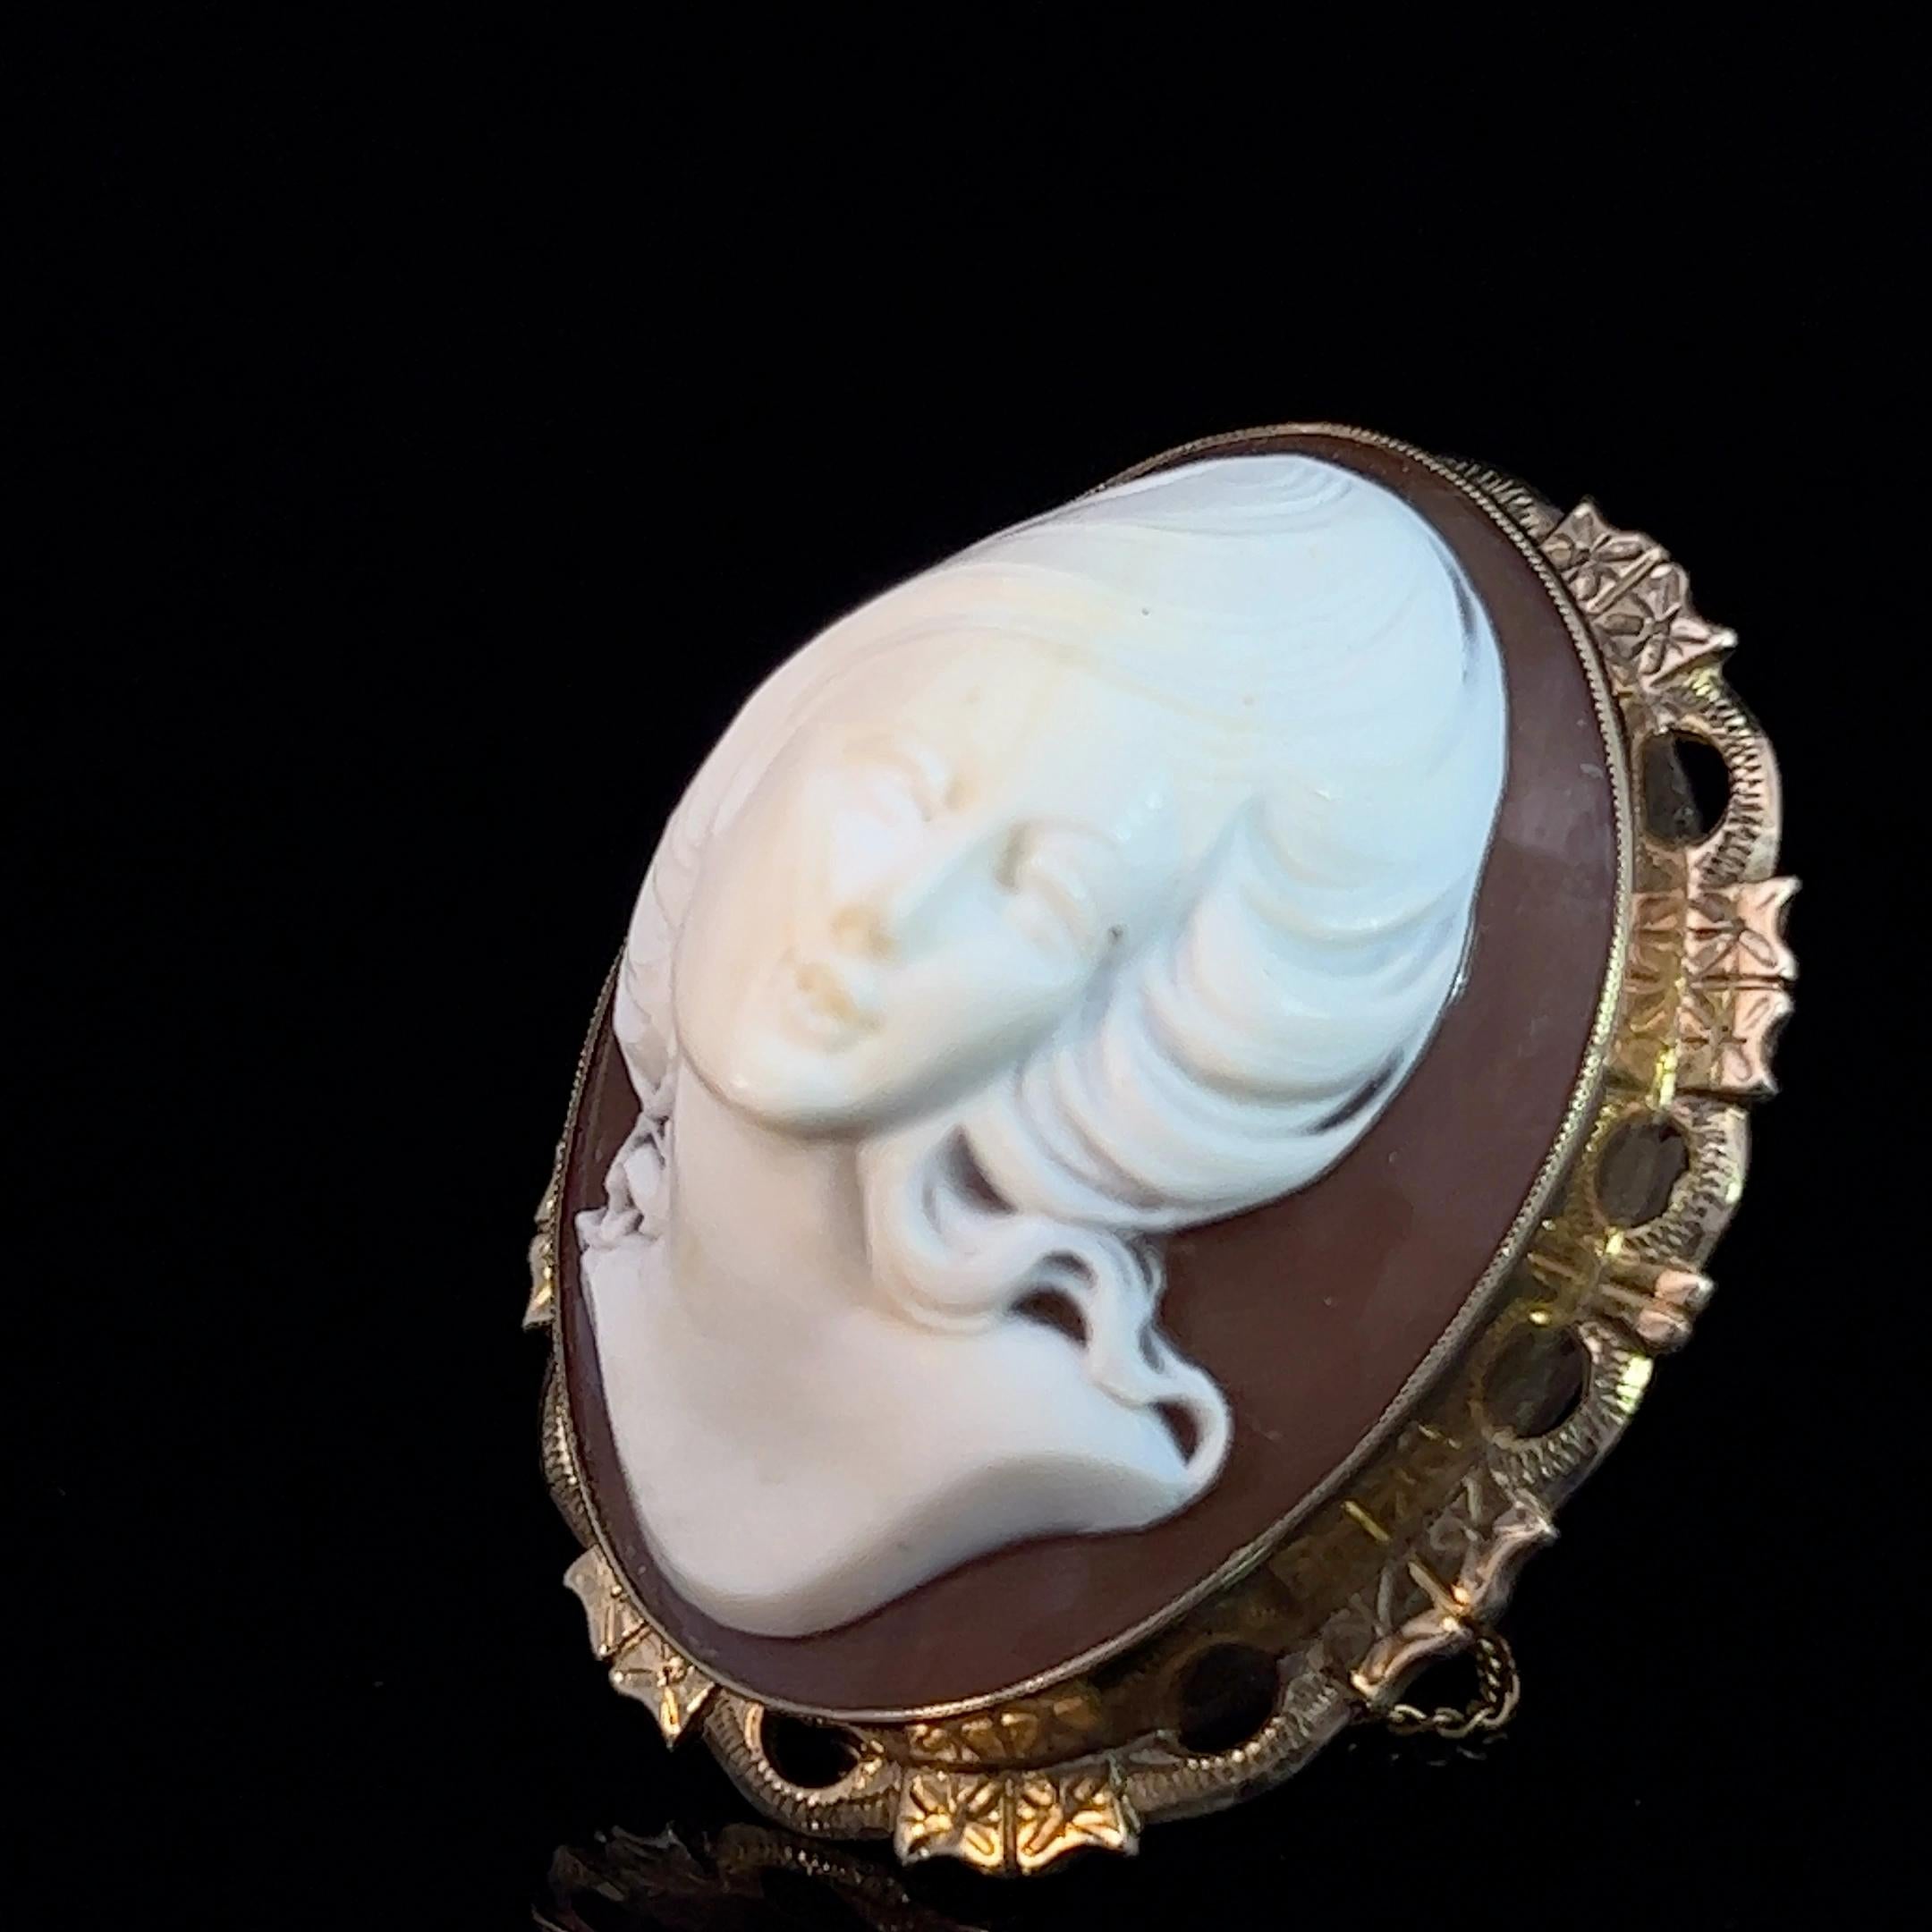 Modern Mid 20th Century Cameo Brooch Circa 1950s For Sale